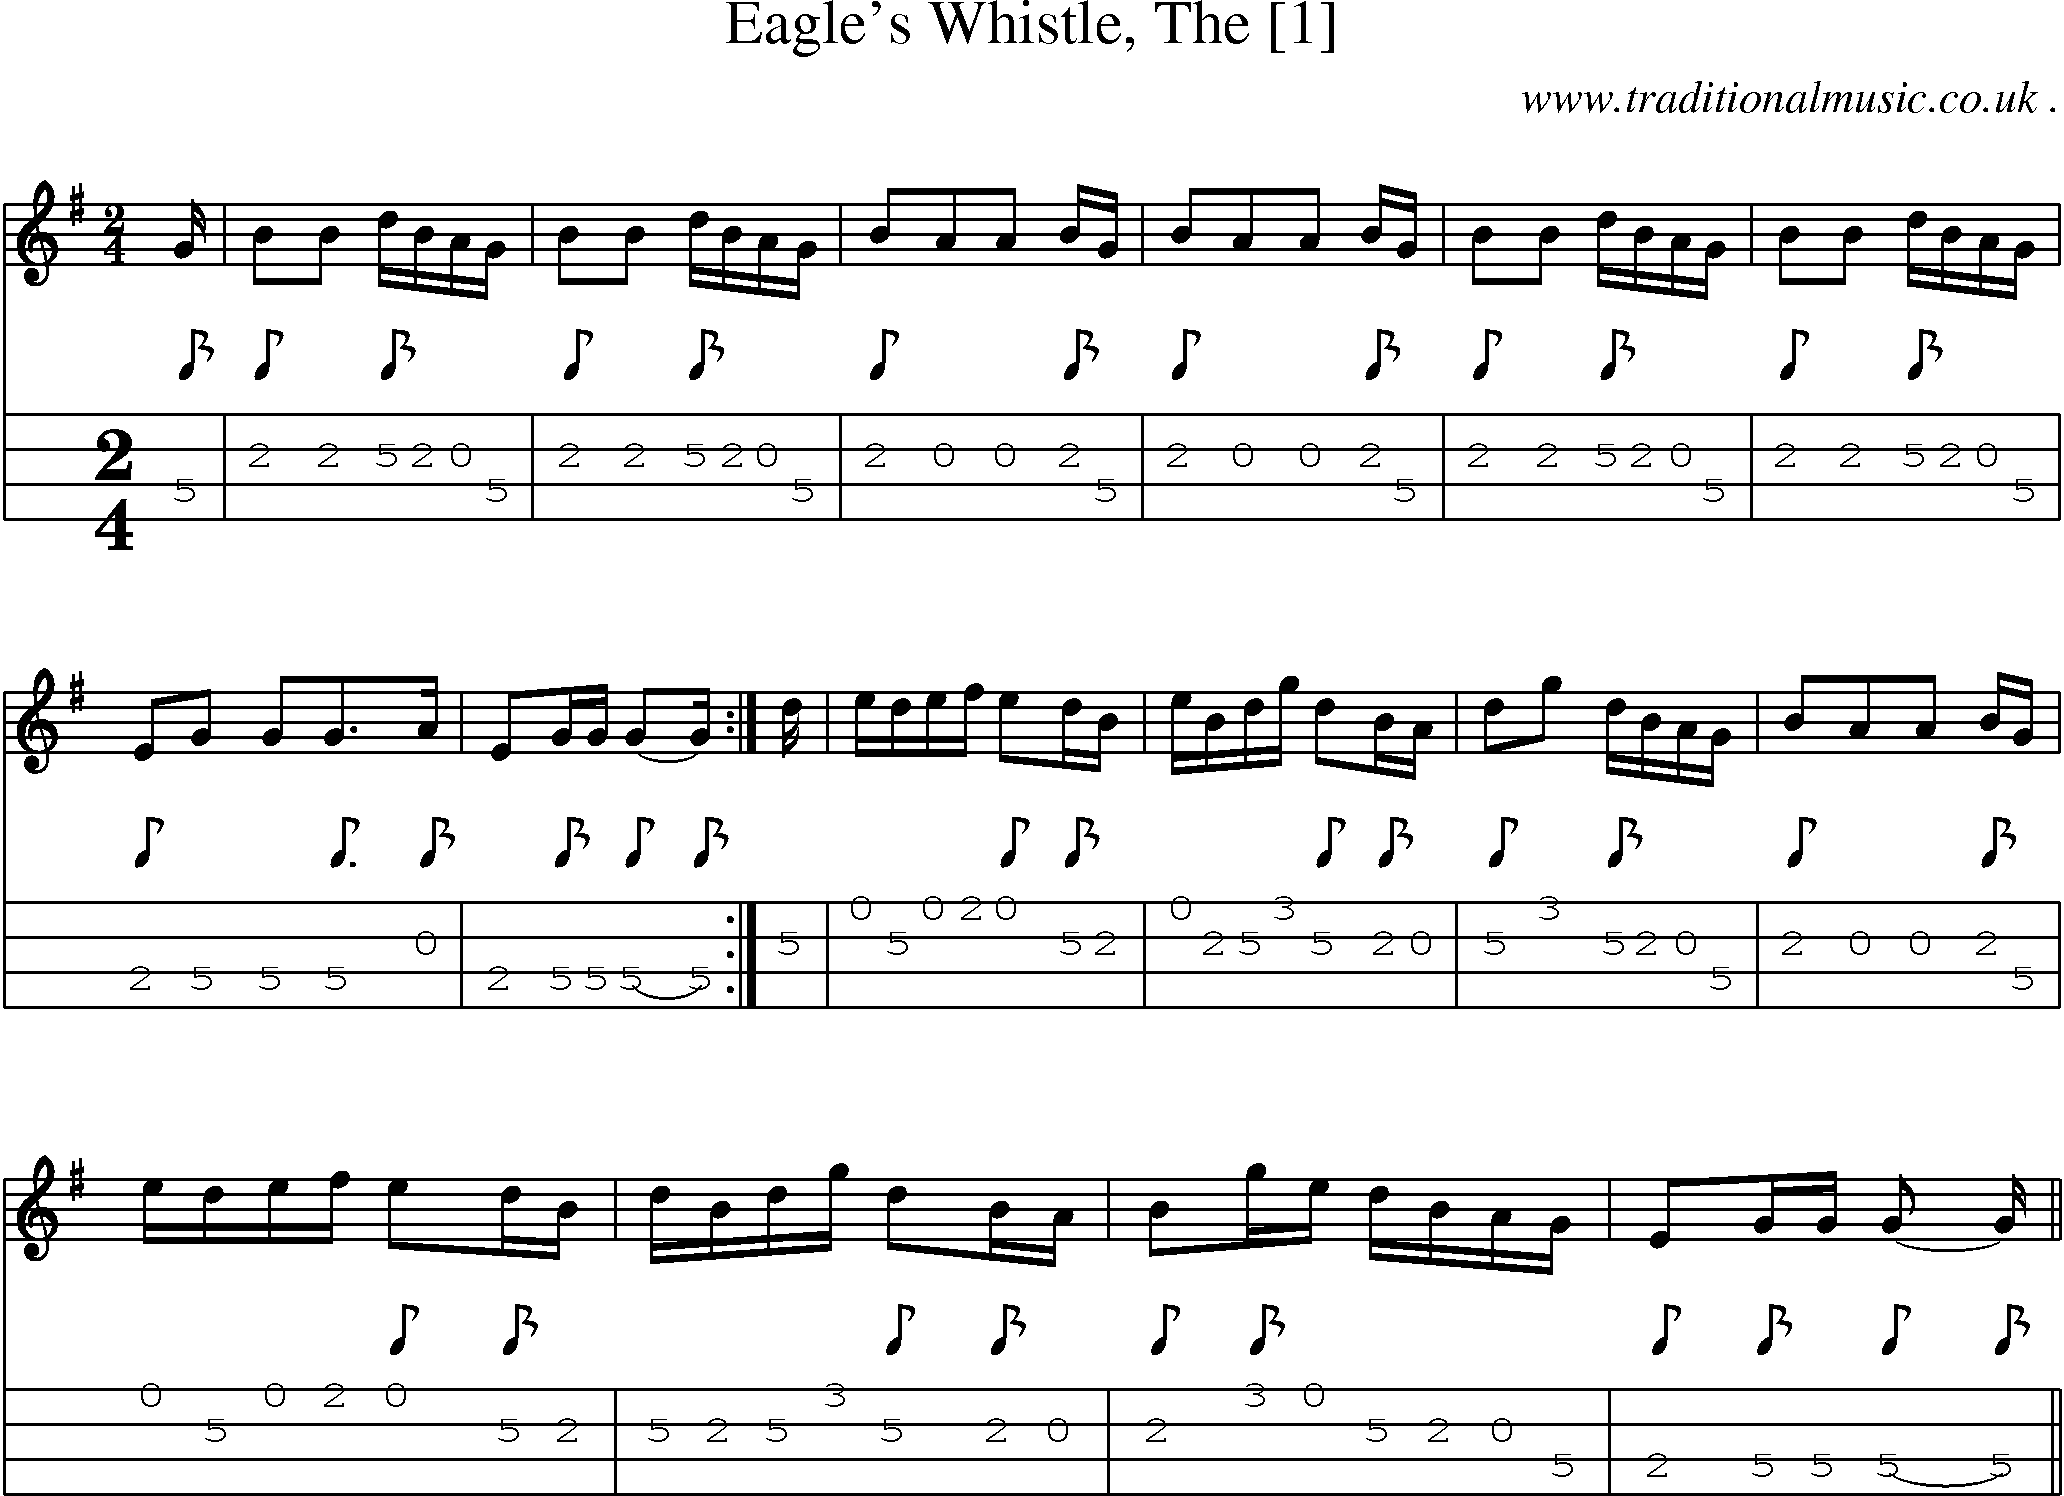 Sheet-music  score, Chords and Mandolin Tabs for Eagles Whistle The [1]